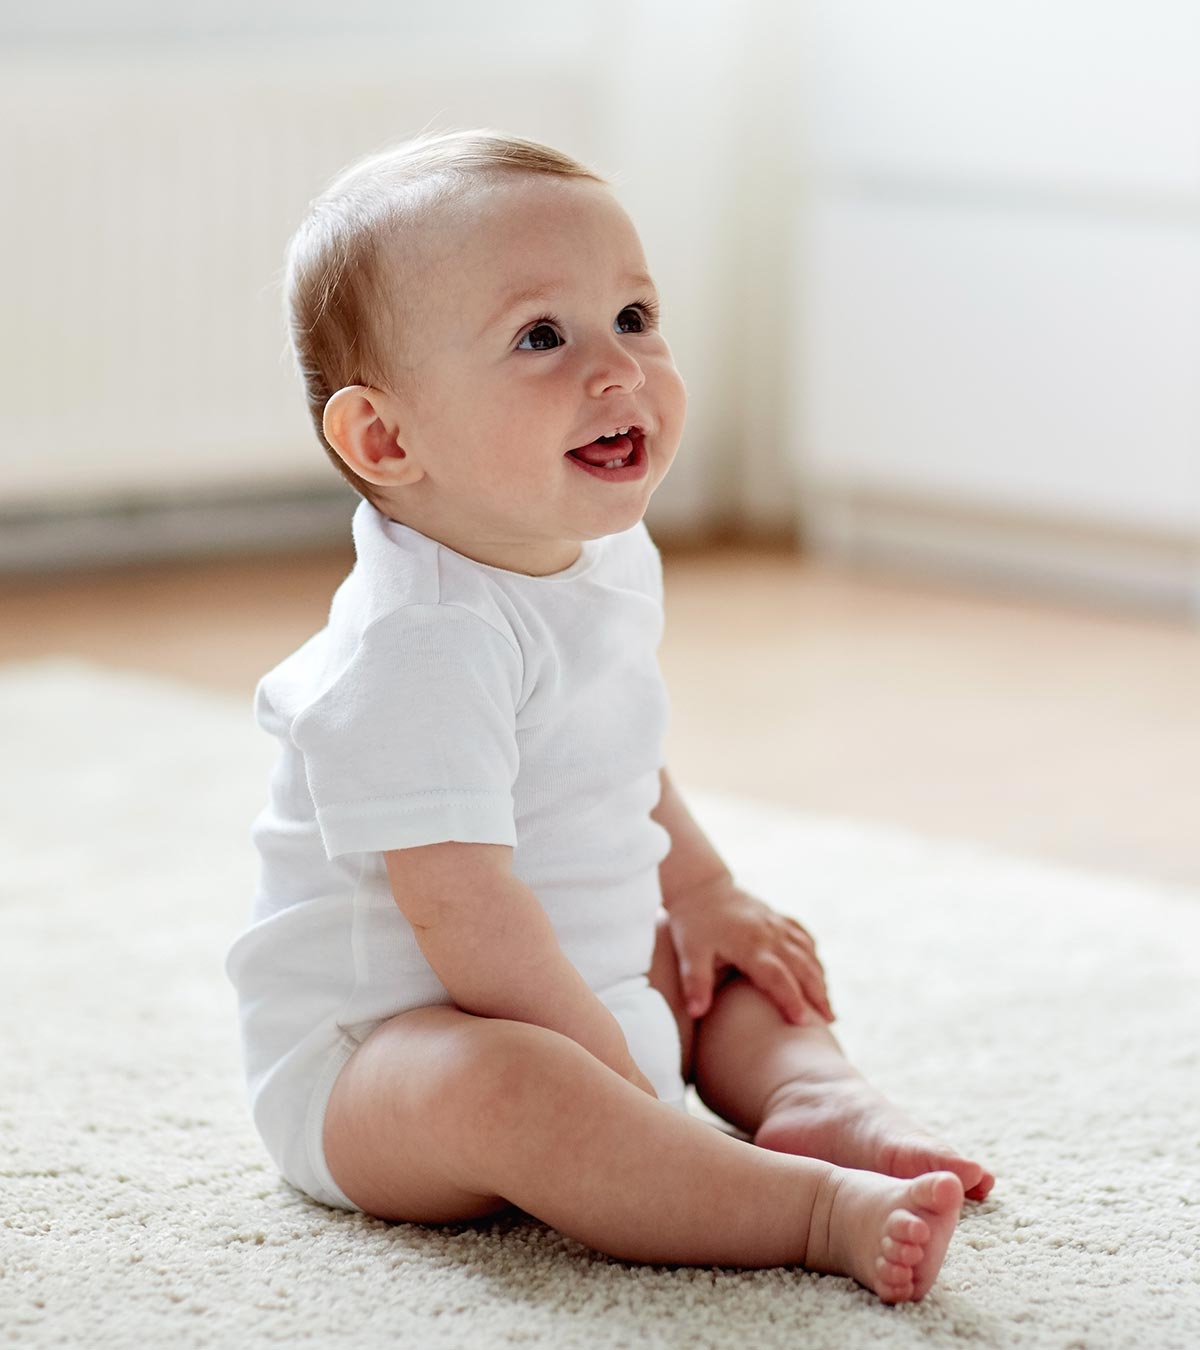 When Do Babies Sit Up On Their Own: Signs & Their Milestones